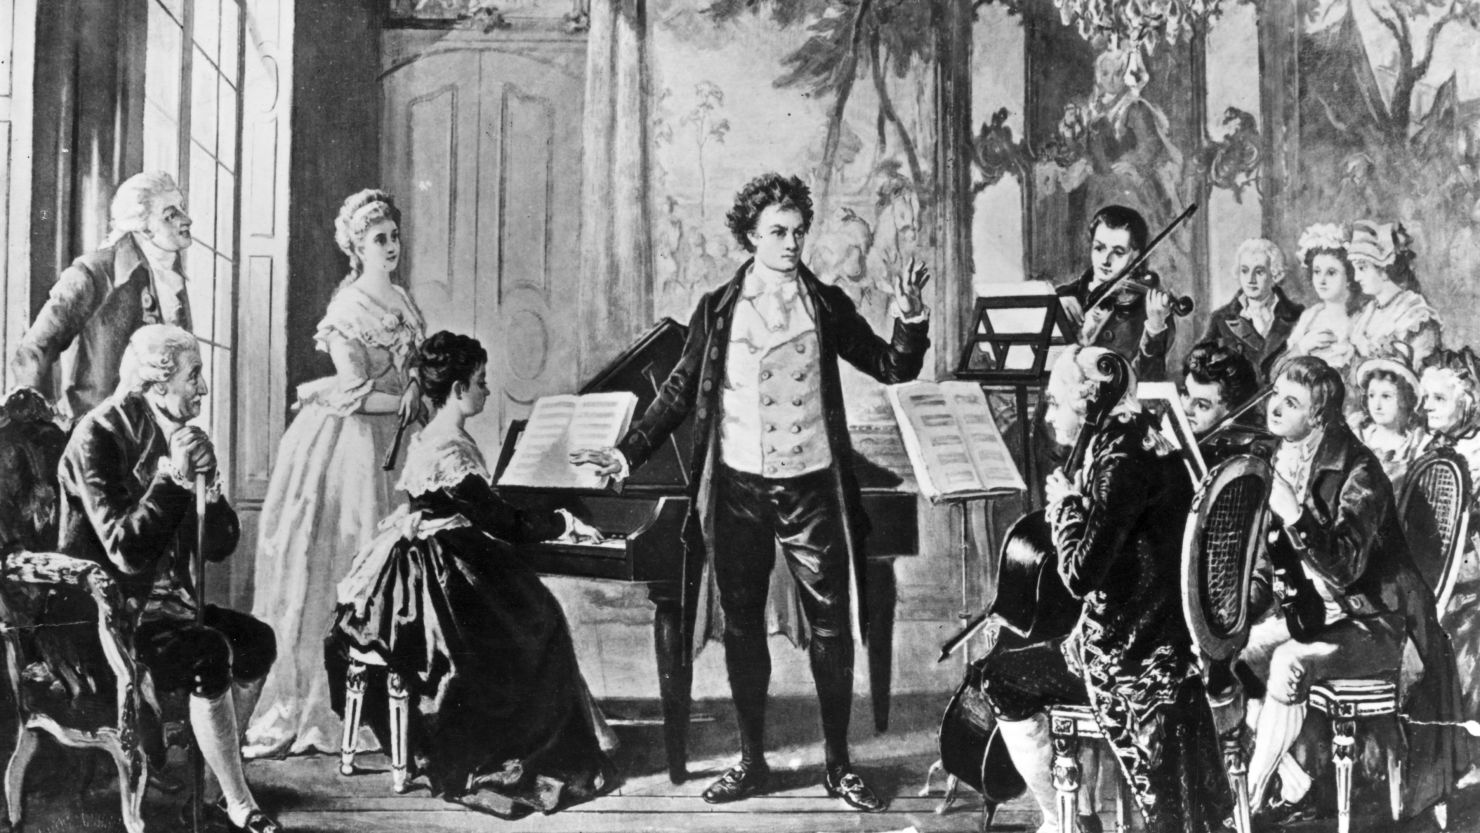 German composer Ludwig van Beethoven is shown in an illustration conducting one of his three Razumovsky string quartets, circa 1810.